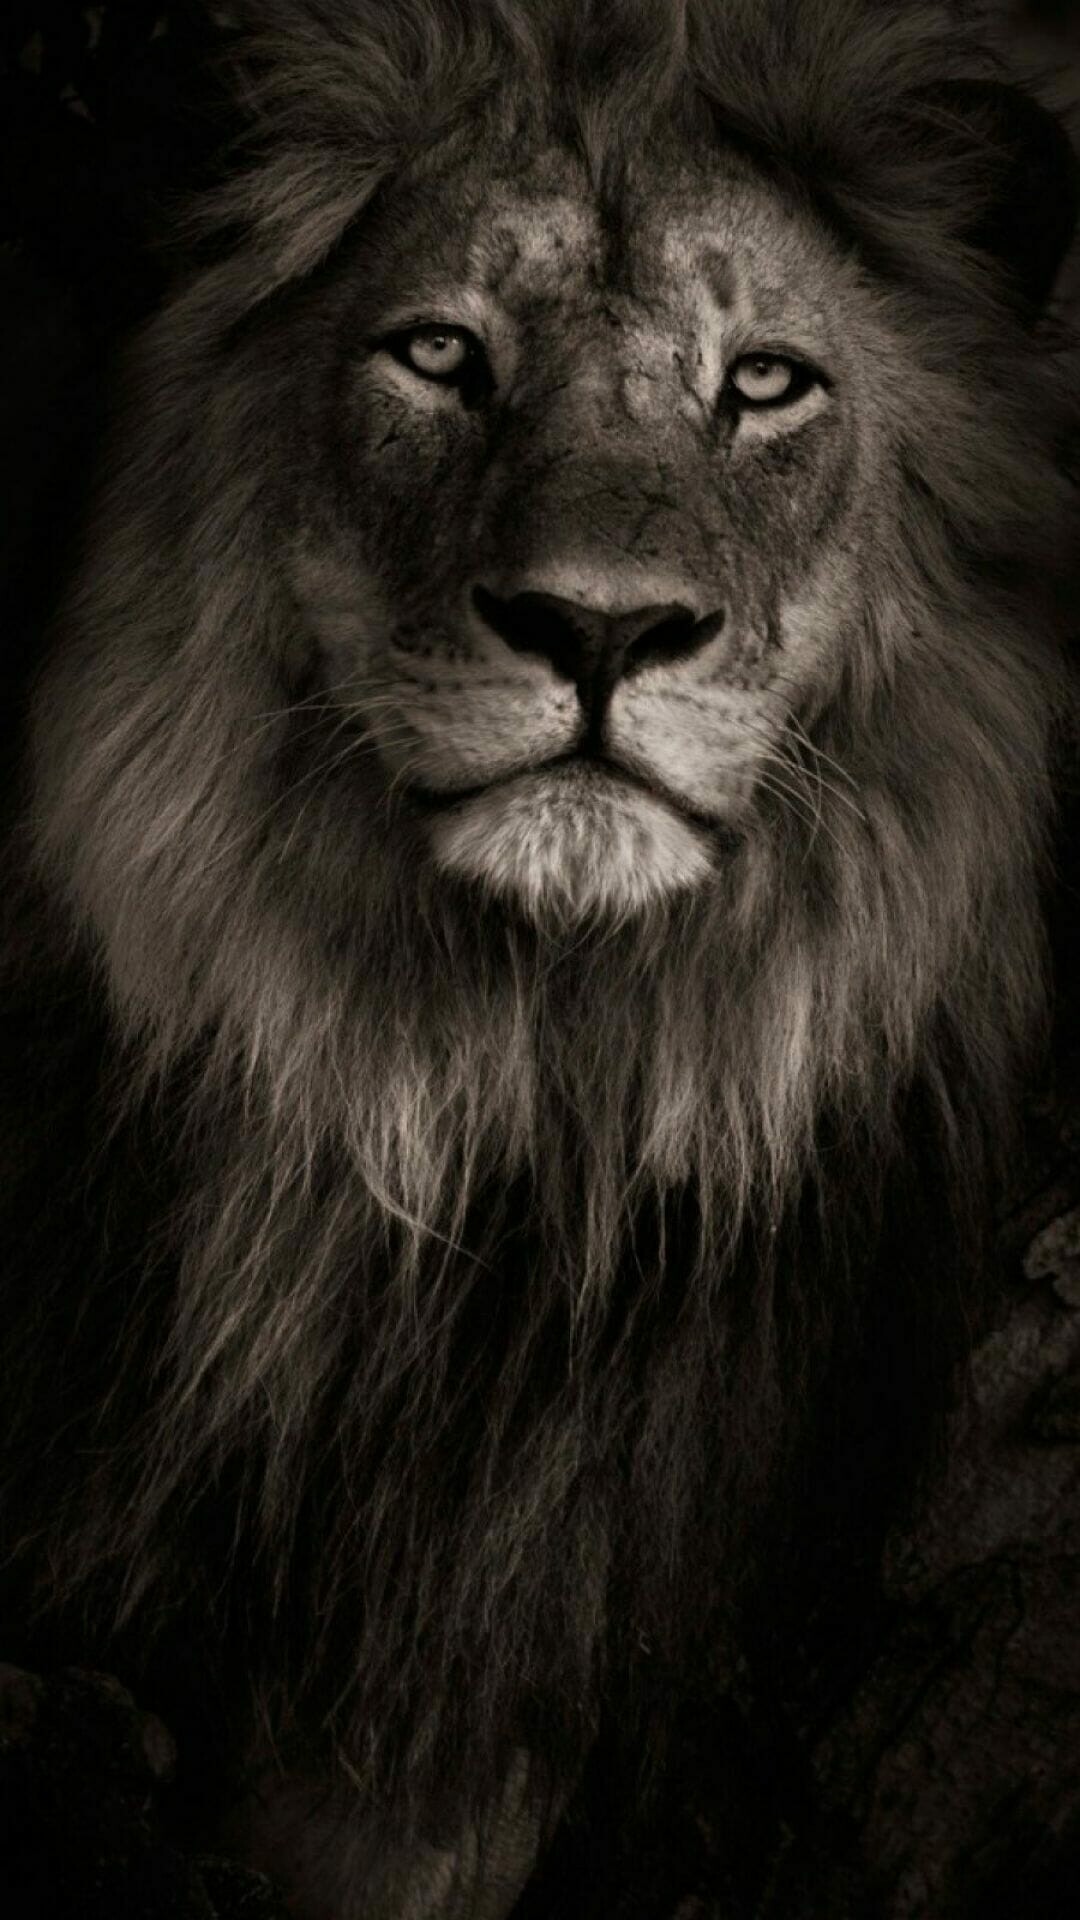 Lion: The only cat with a mane, Terrestrial animal. 1080x1920 Full HD Wallpaper.